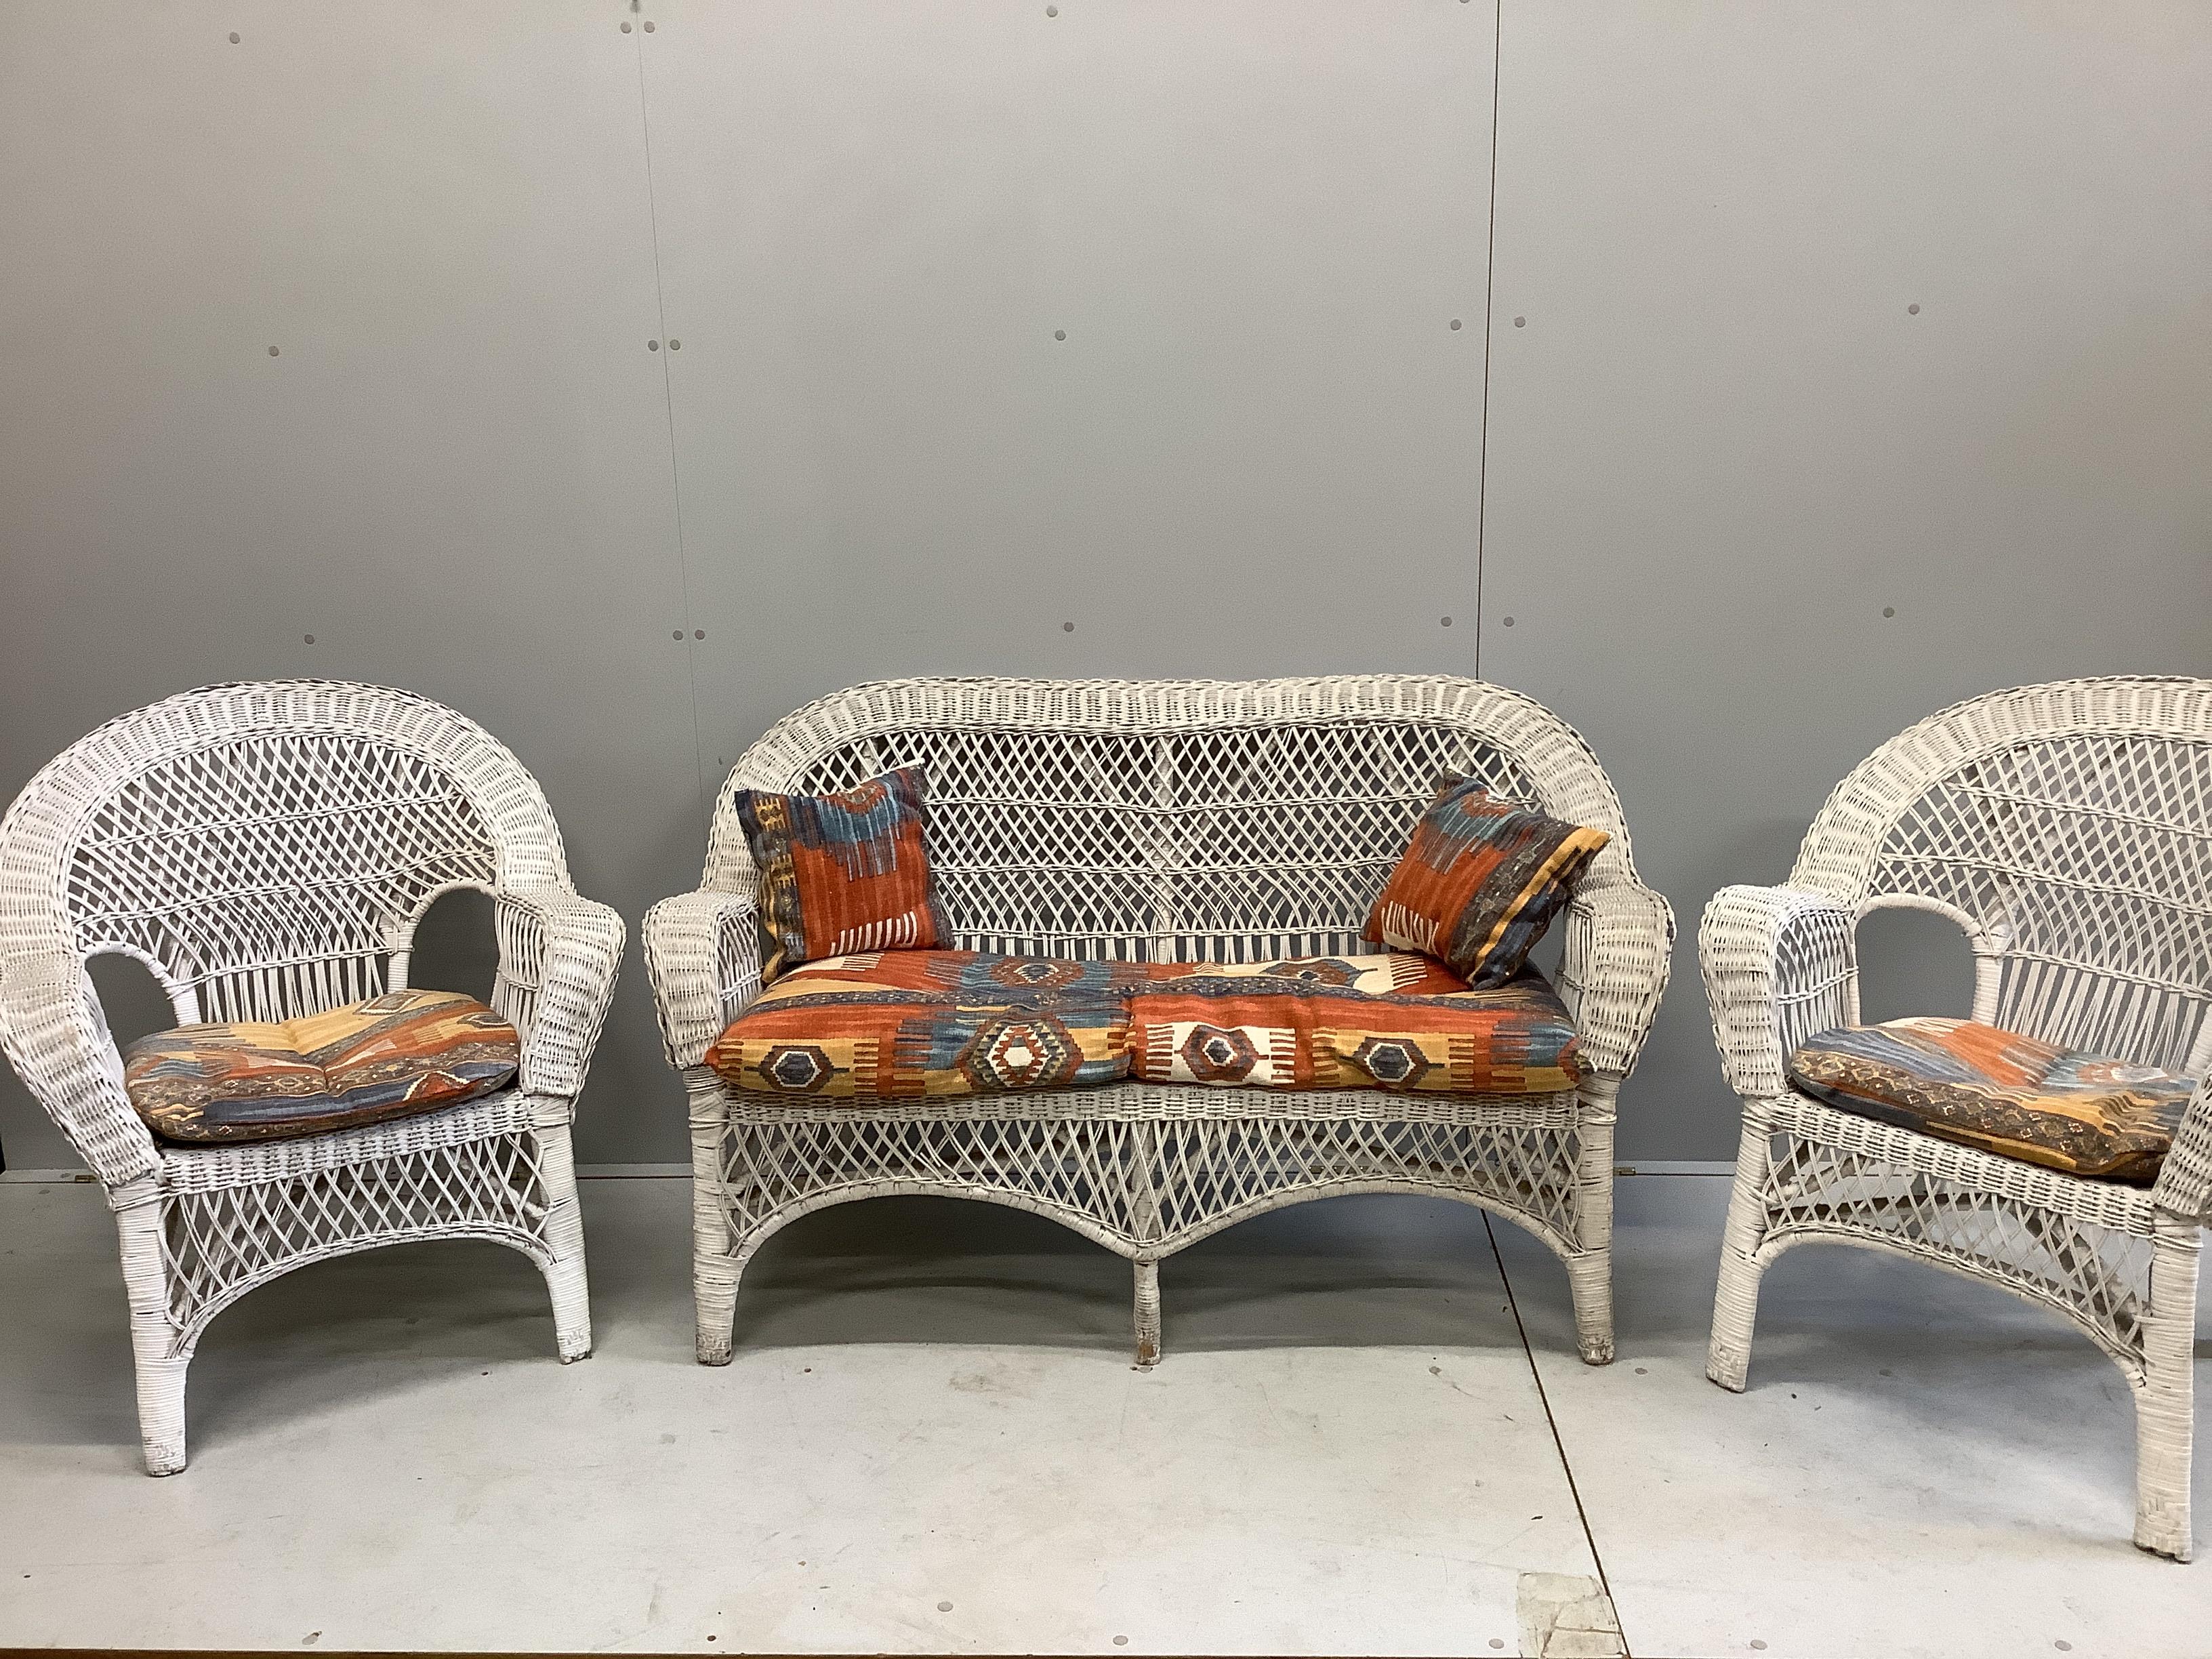 A vintage wicker three piece conservatory suite with Kilim style printed fabric cushions, settee width 134cm, depth 54cm, height 81cm